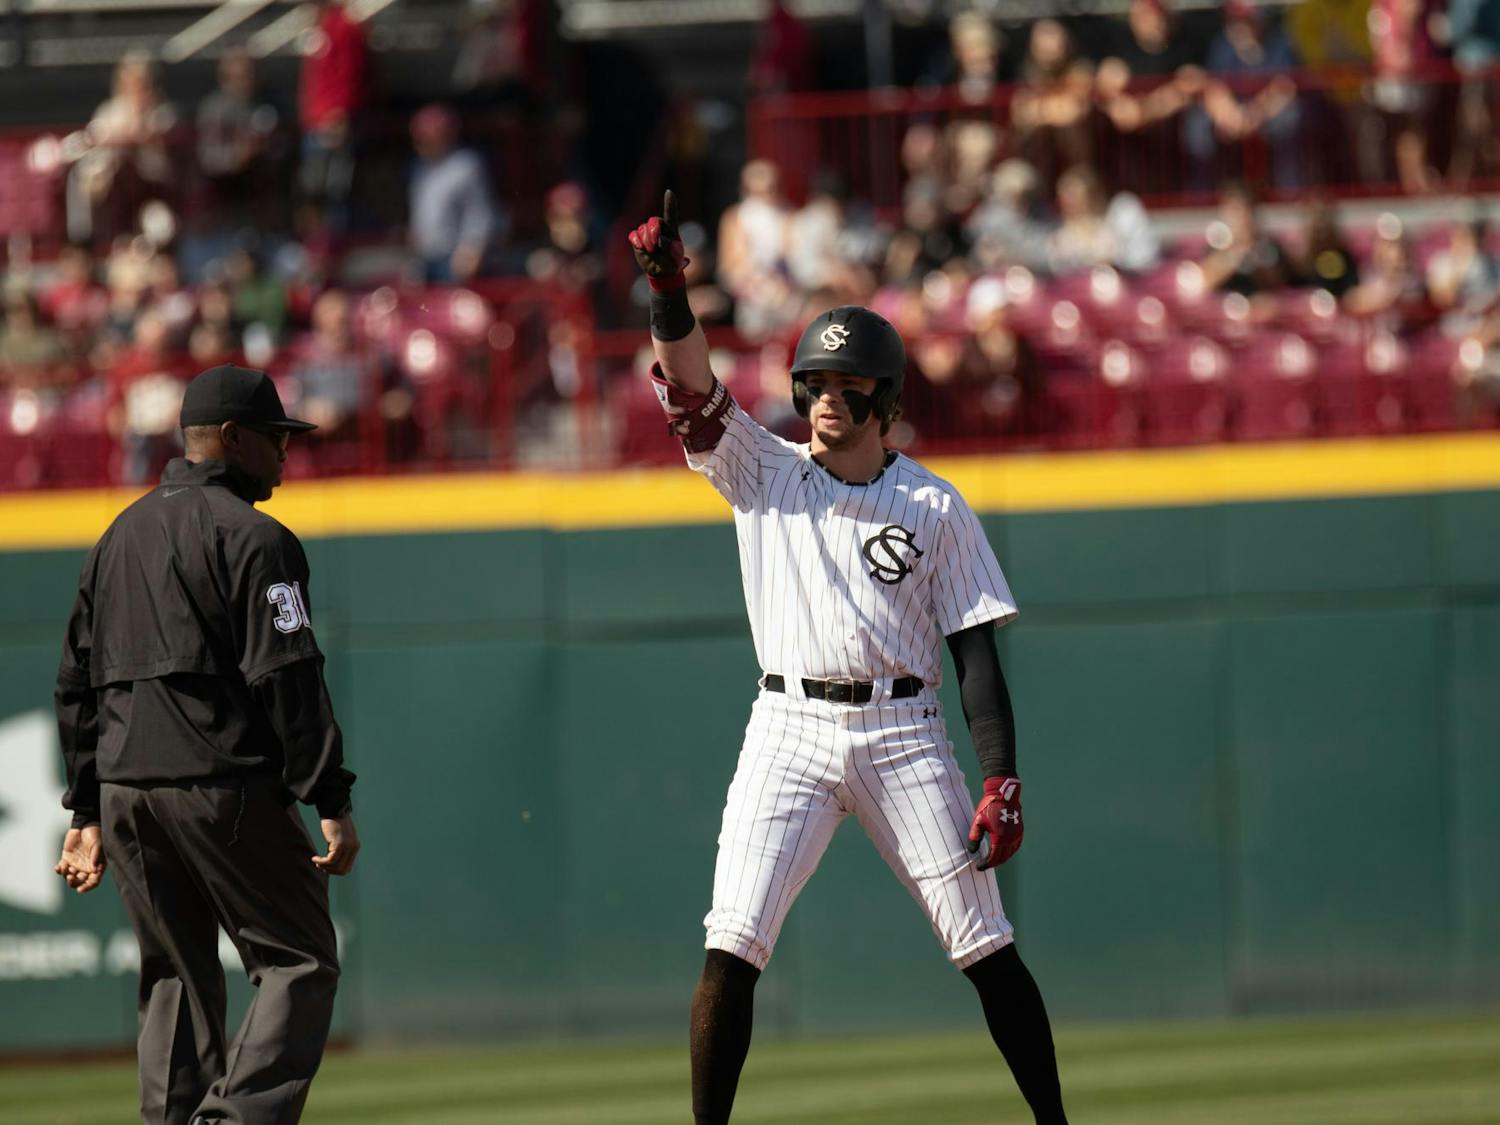 Fifth-year infielder Parker Noland points to the sky after hitting a double during South Carolina's game against Belmont on Feb. 24, 2024. Noland went 1-5 in at-bats during the Gamecocks' 11-2 loss to the Bruins.